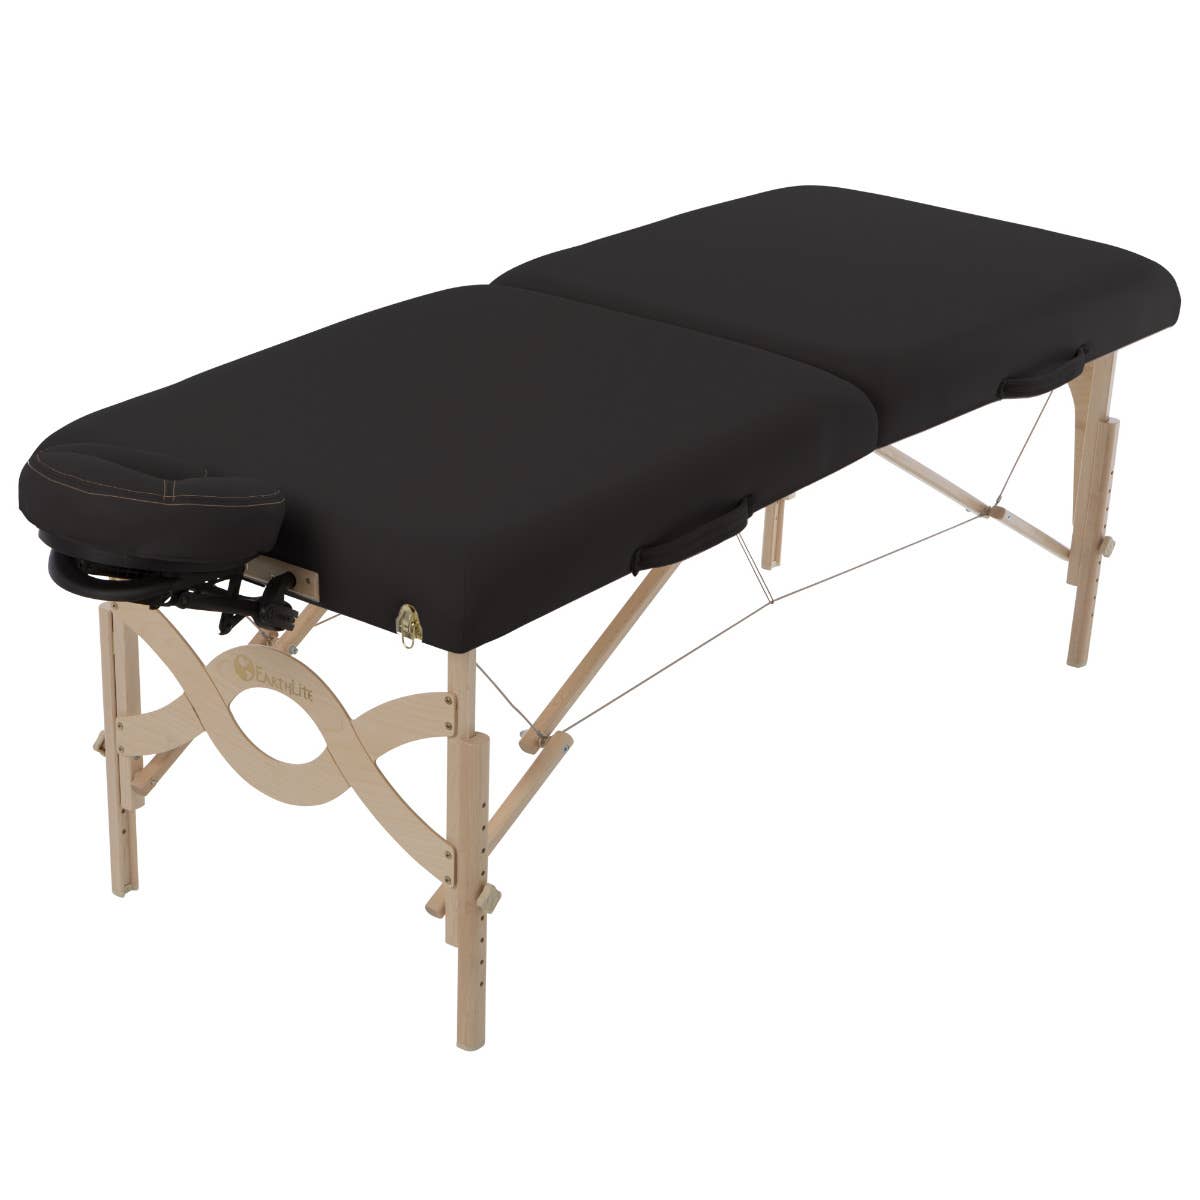 EARTHLITE Avalon XD Massage Table Package